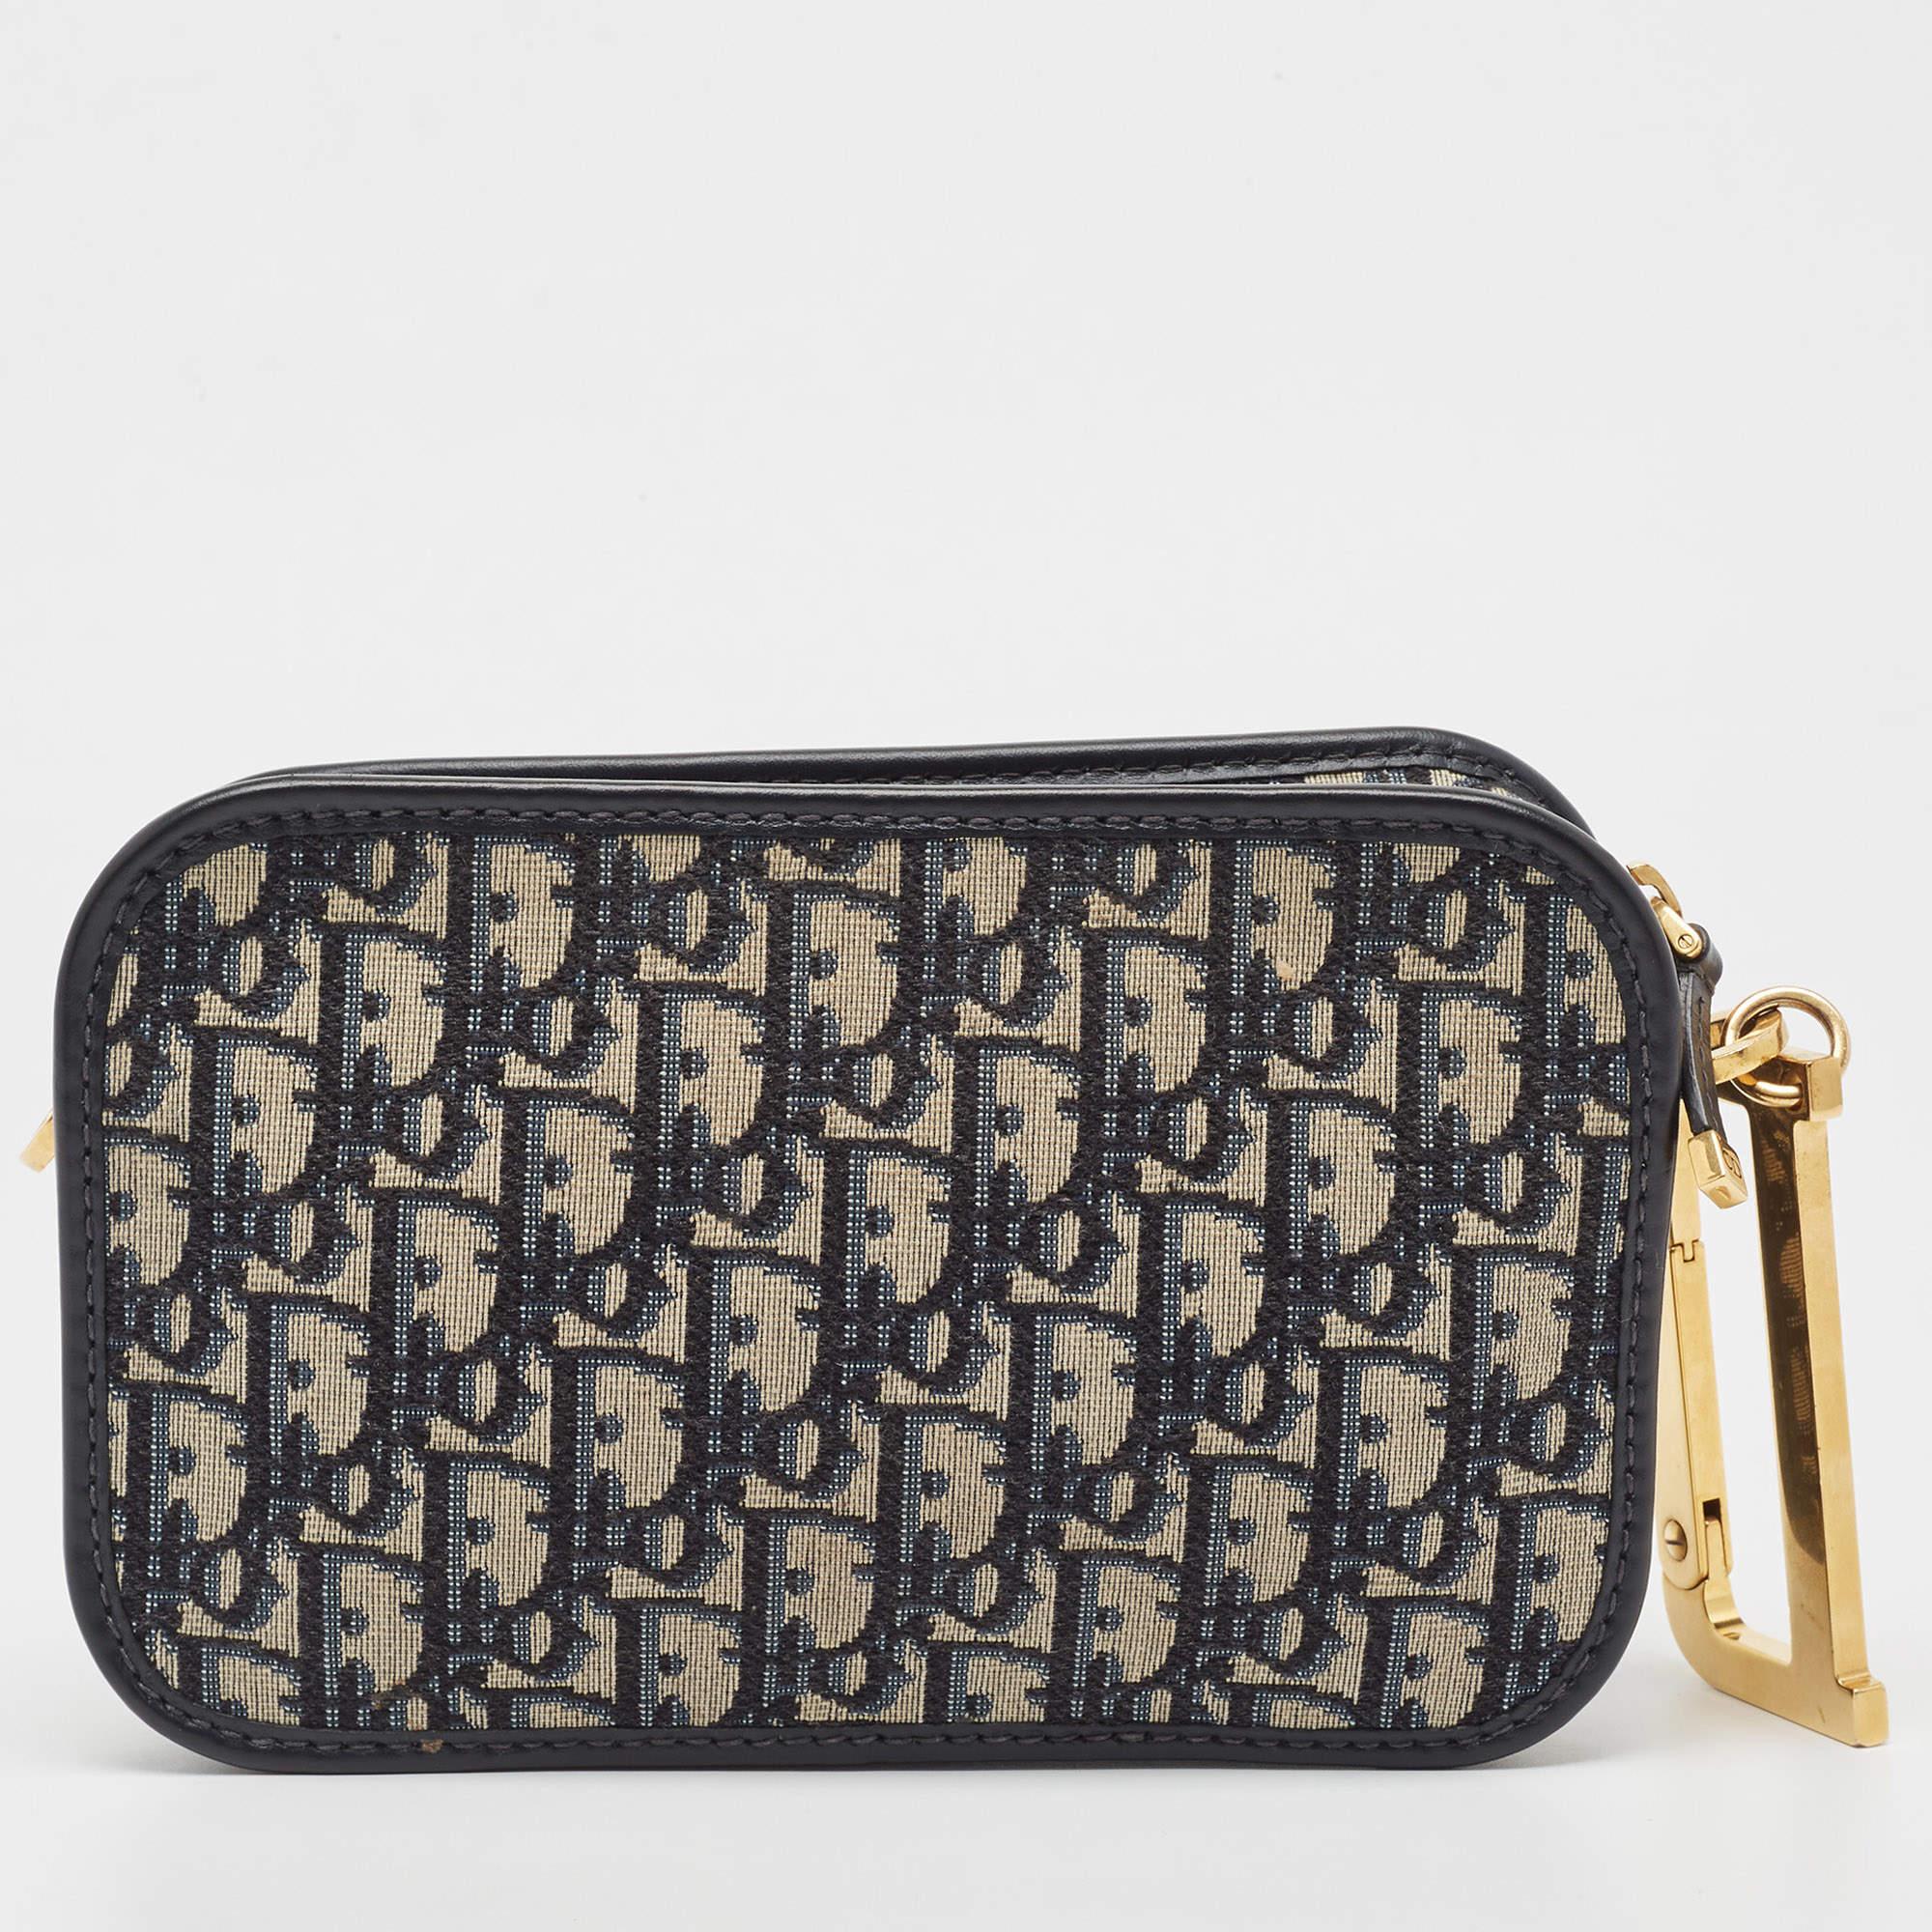 This Dior Diorquake clutch for women has the kind of design that ensures high appeal, whether held in your hand or tucked under your arm. It is a meticulously crafted piece bound to last a long time.

Includes: Info Card